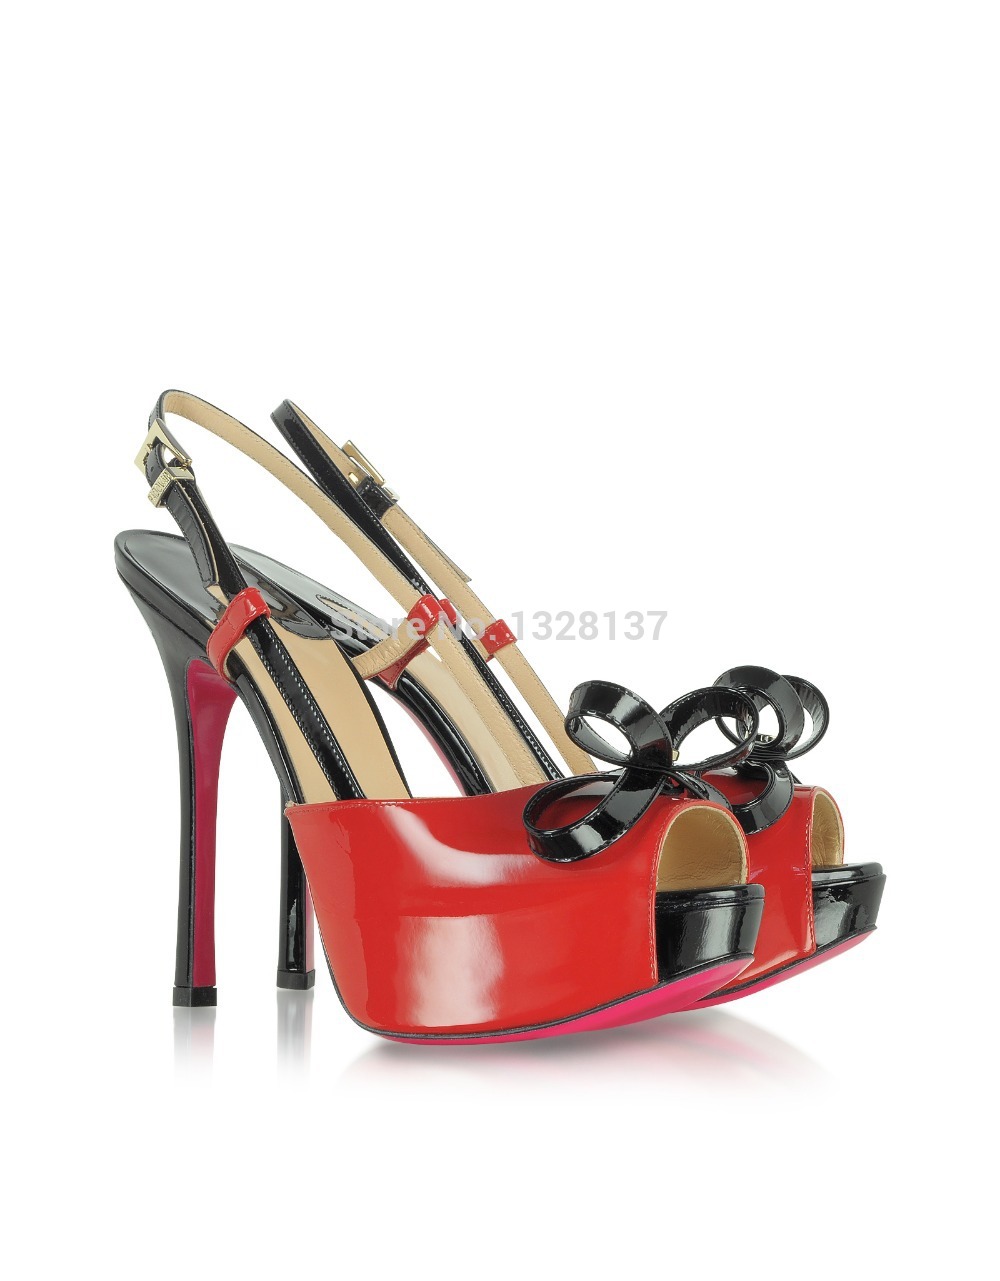 louboutin copy - Compare Prices on Red Bottoms Heels for Cheap- Online Shopping/Buy ...